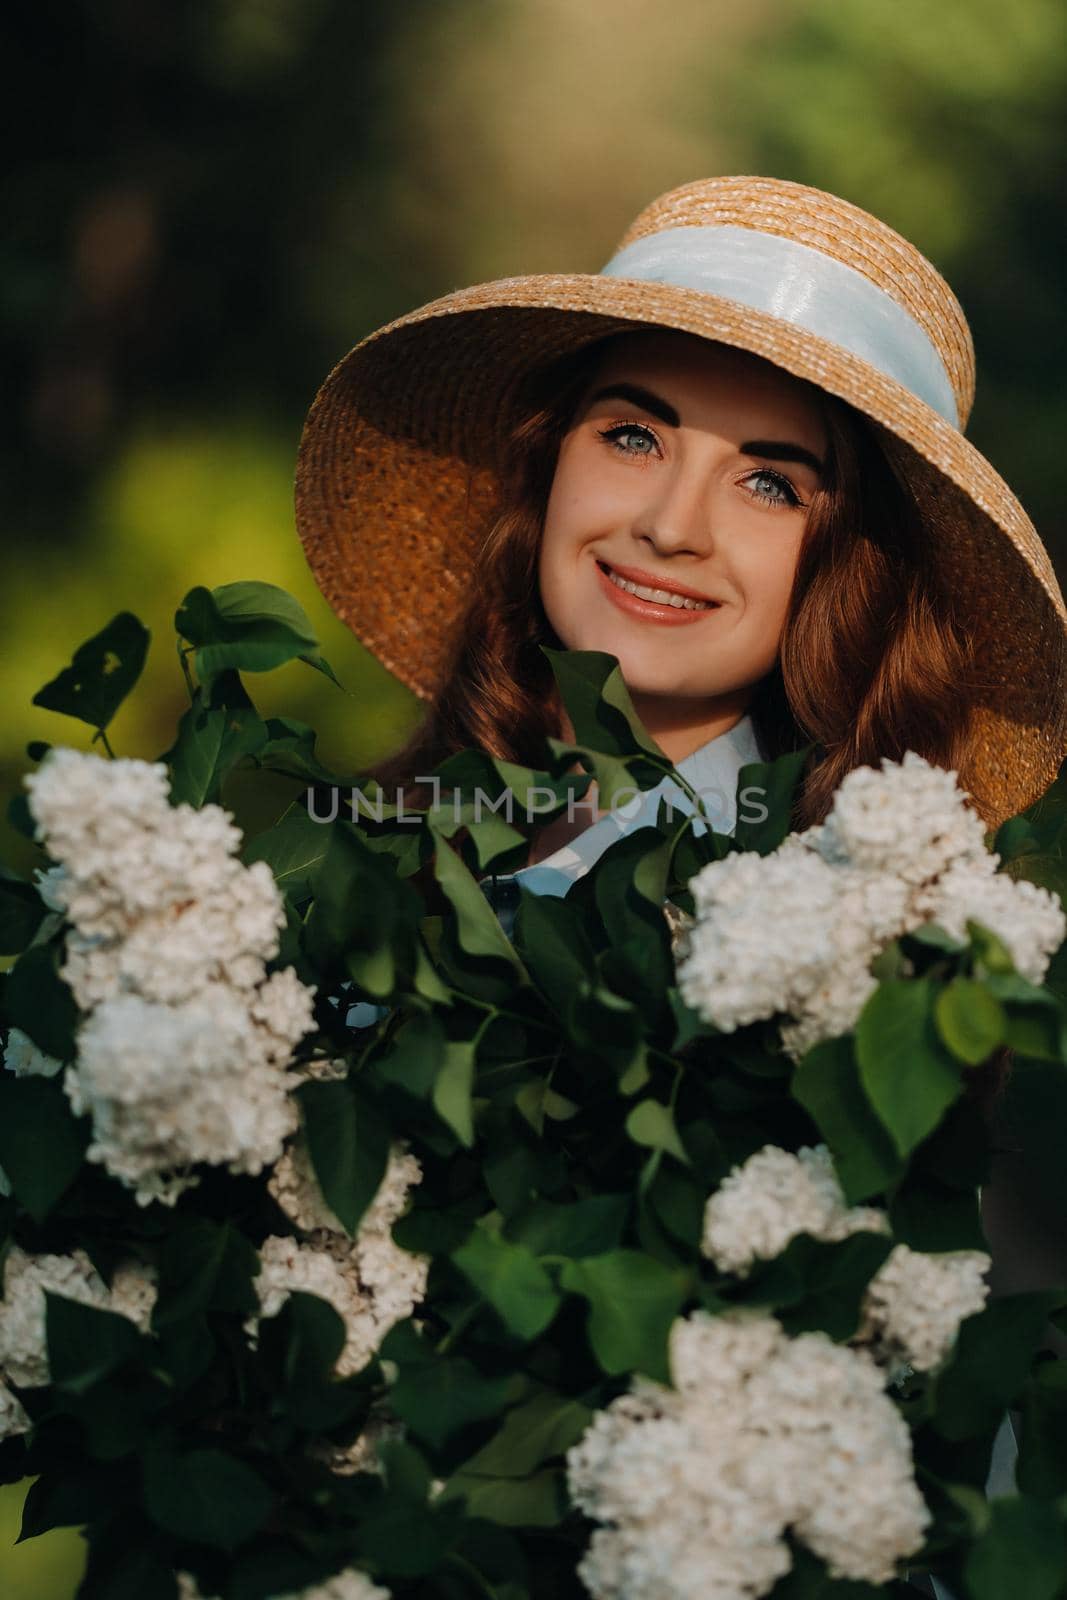 Portrait of a beautiful girl with long hair, a straw hat and a long summer dress with lilac flowers in the garden.